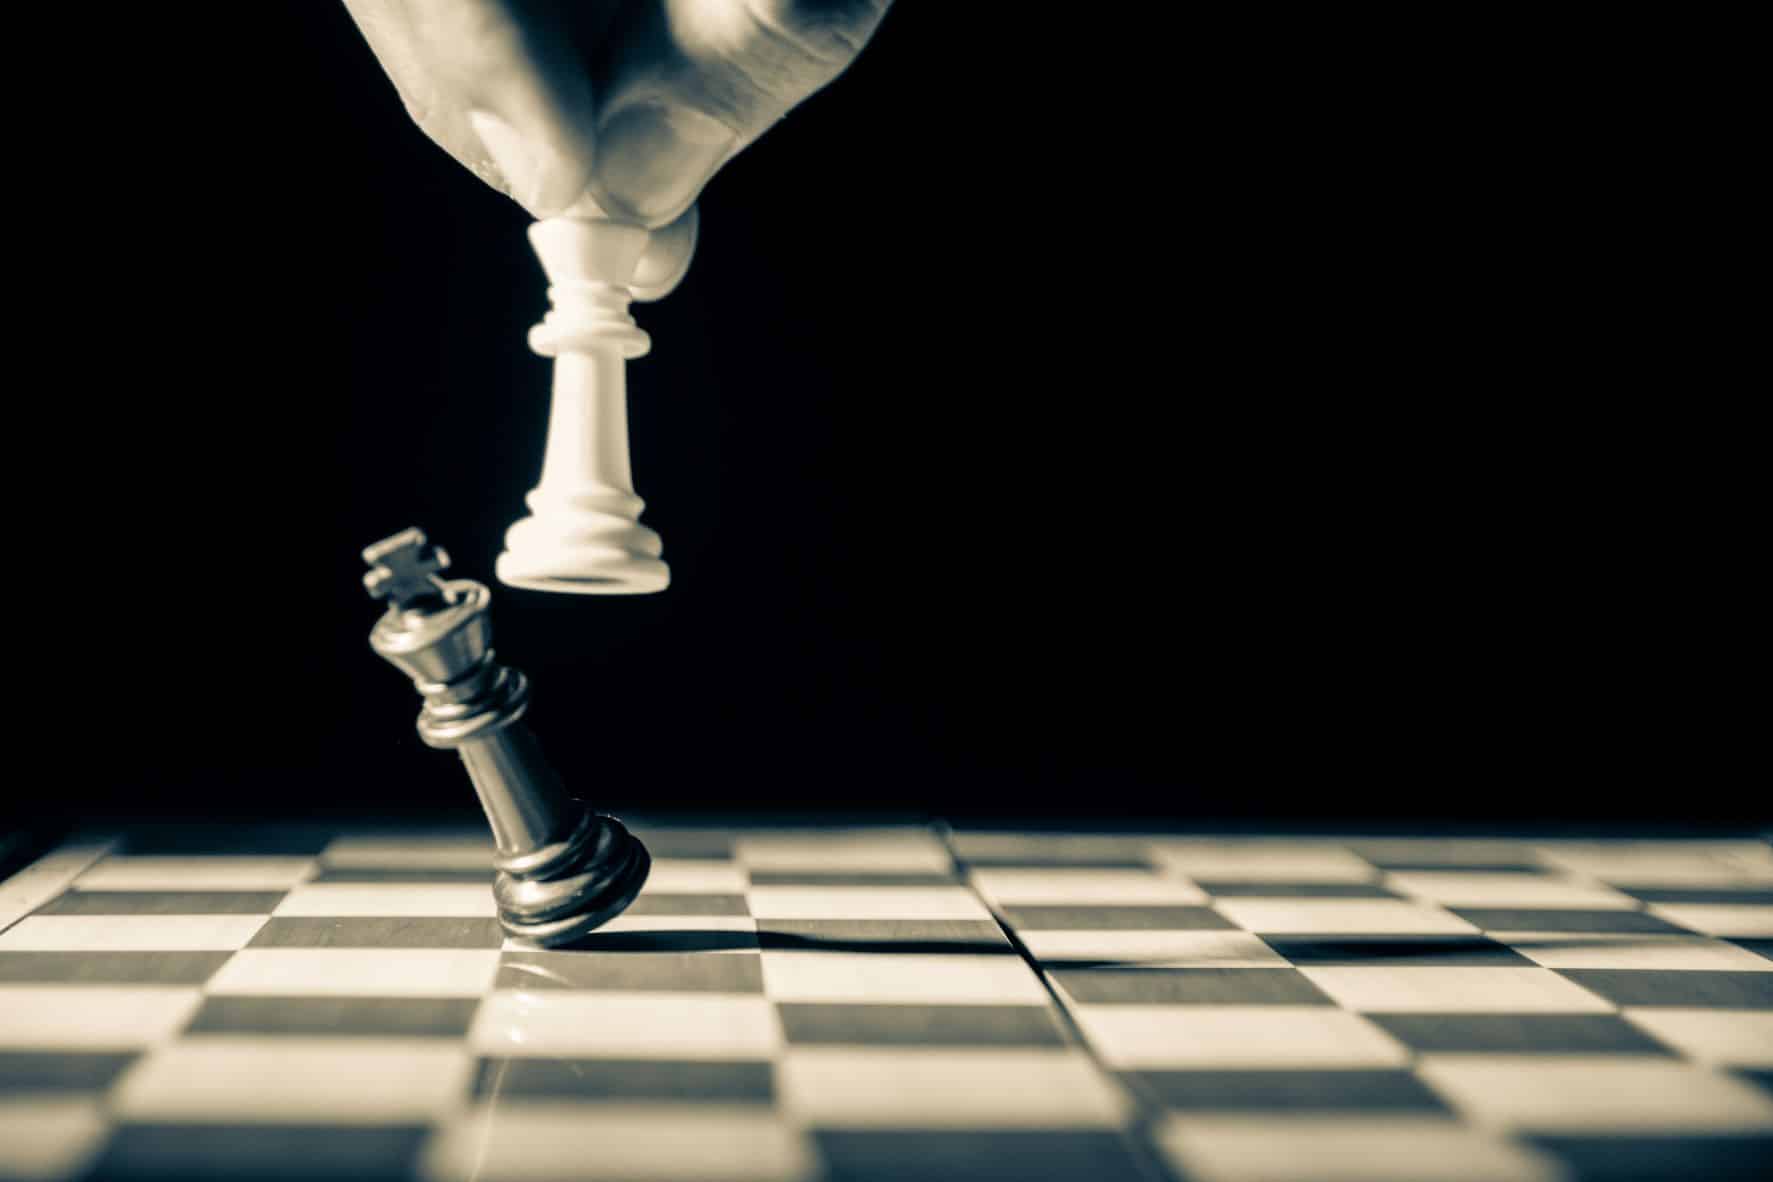 white pawn knocking over a black pawn on chessboard